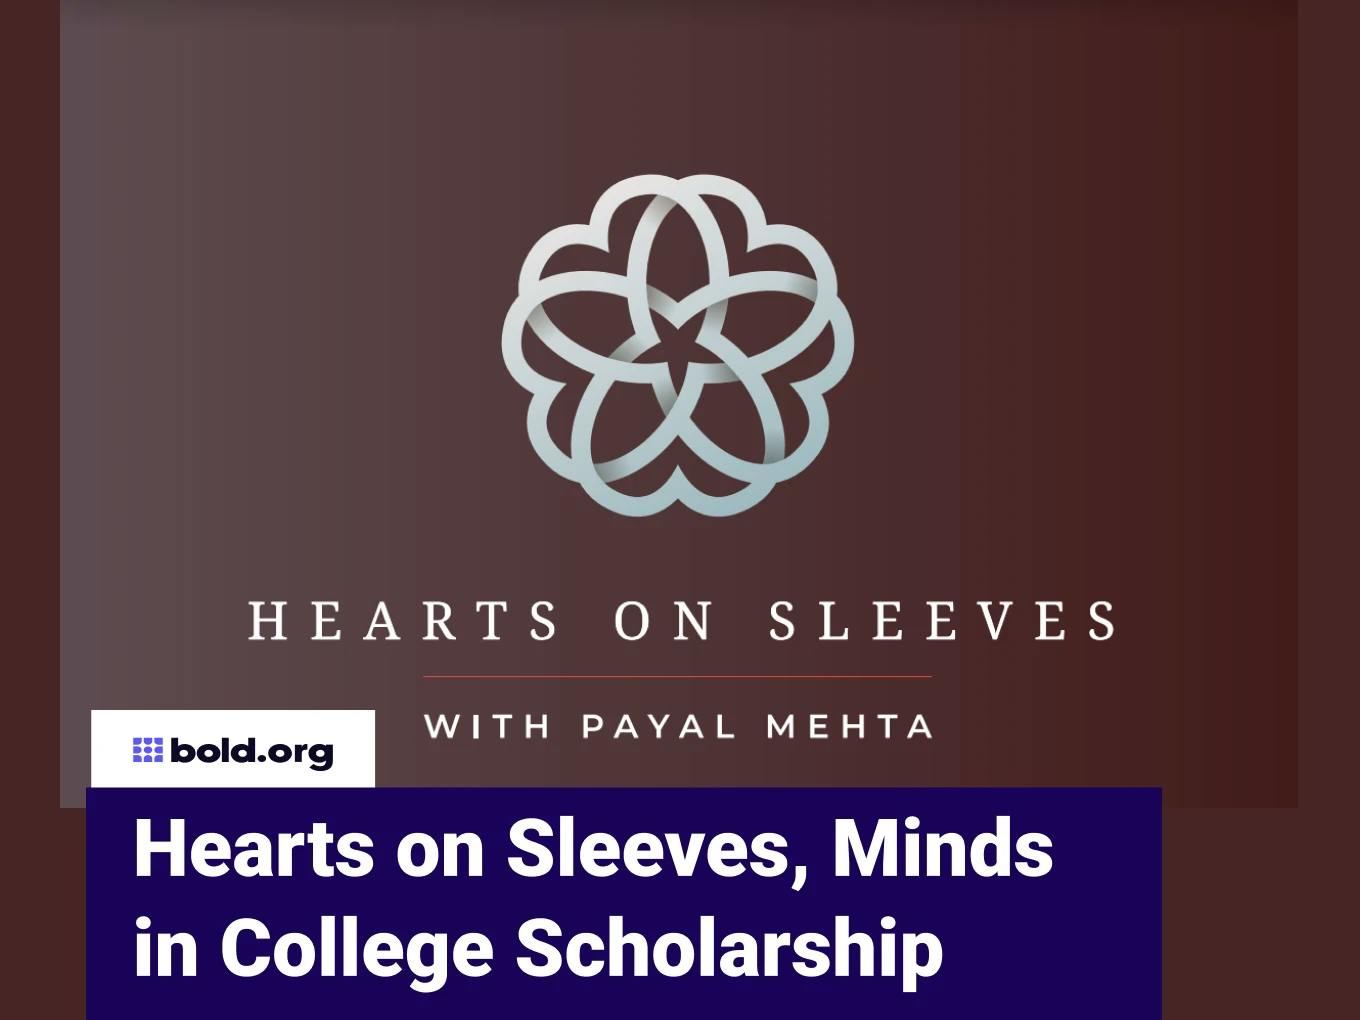 Hearts on Sleeves, Minds in College Scholarship